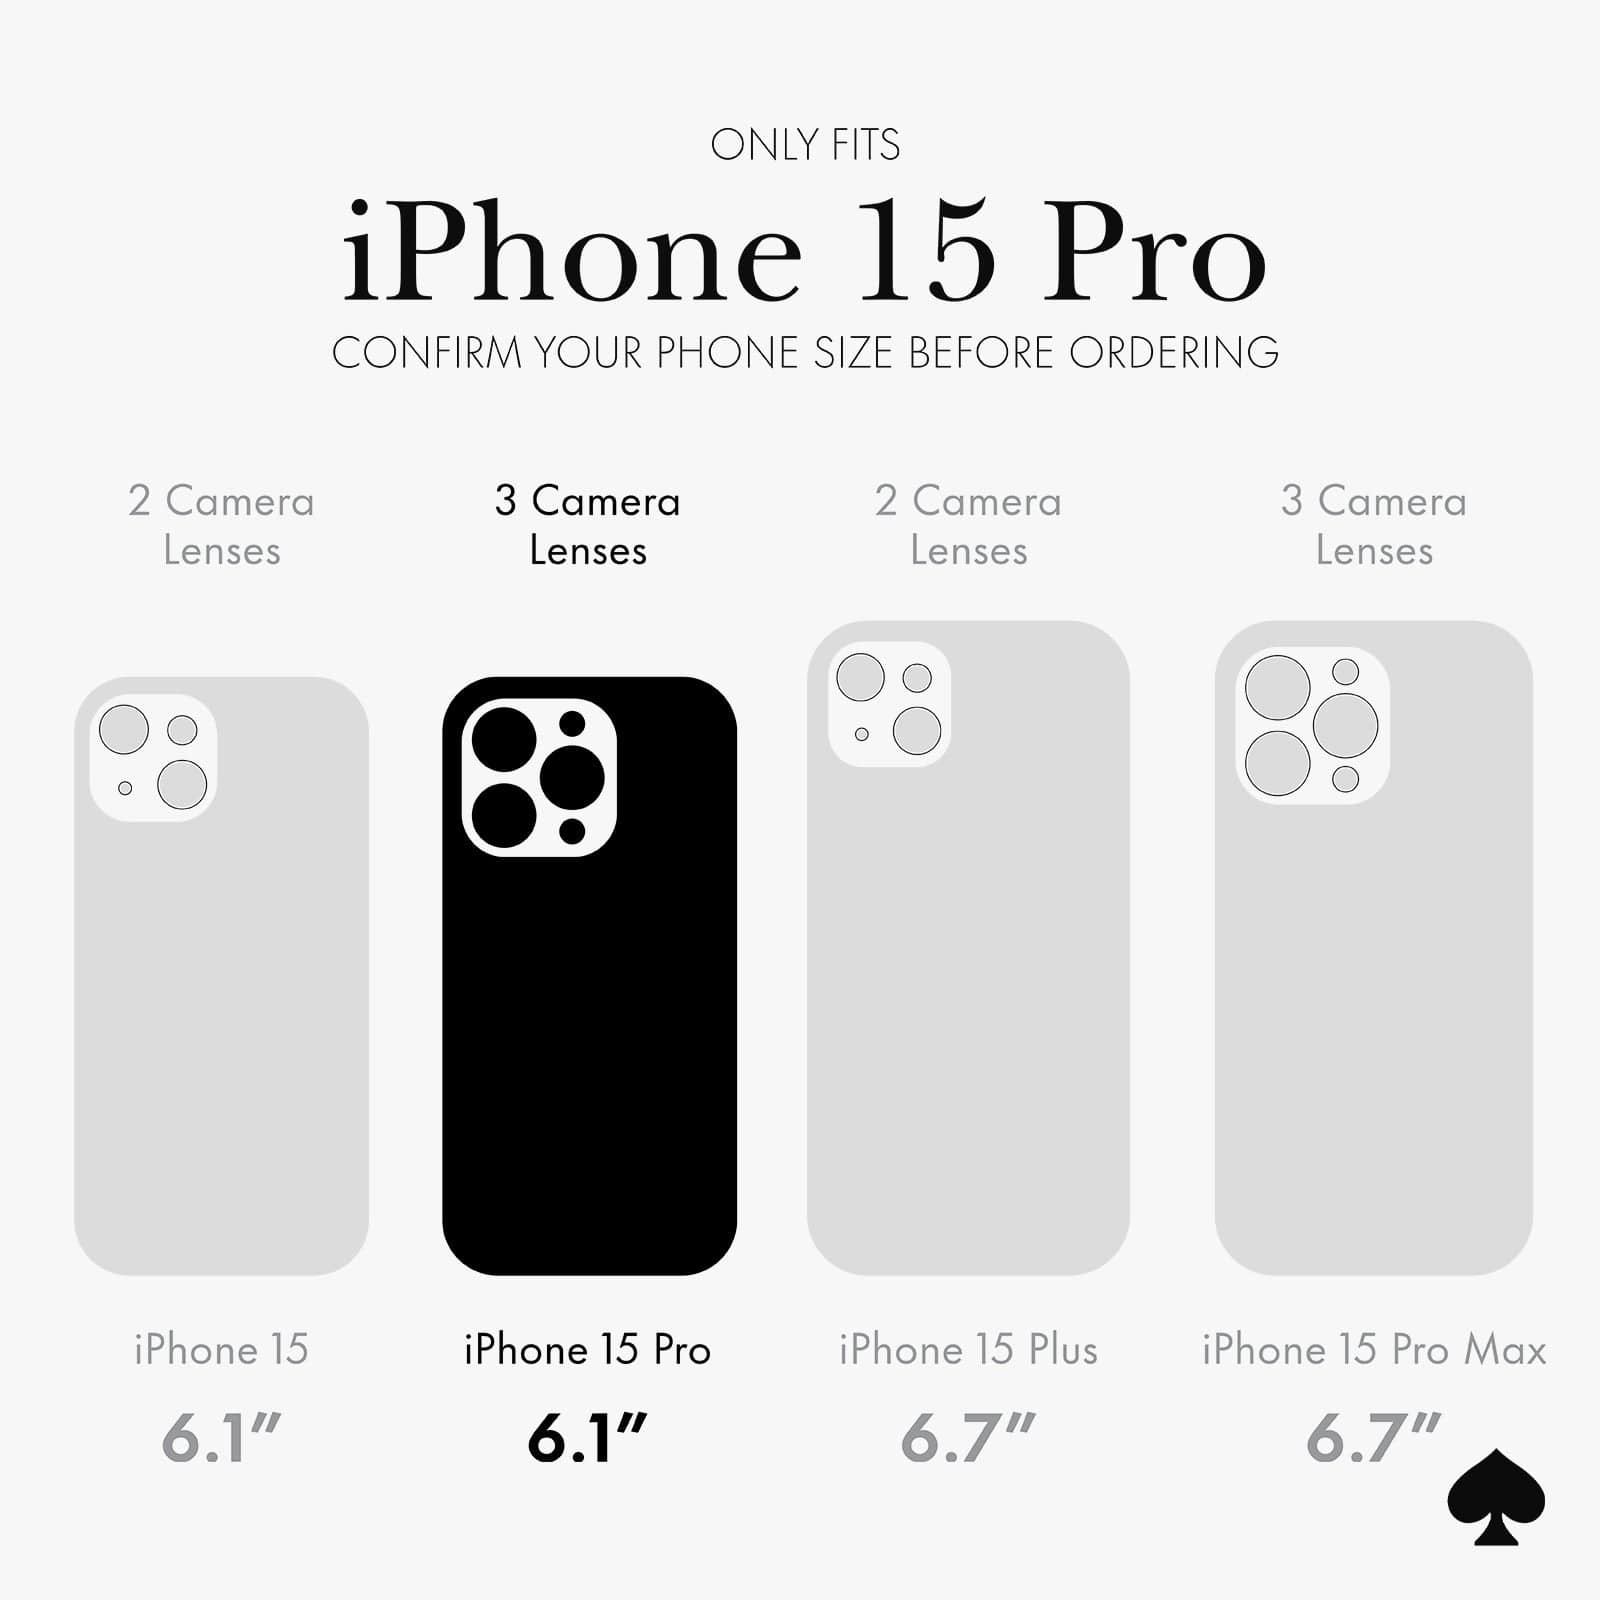 ONLY FITS IPHONE 15 PRO CONFIRM YOUR PHONE SIZE BEFORE ORDERING